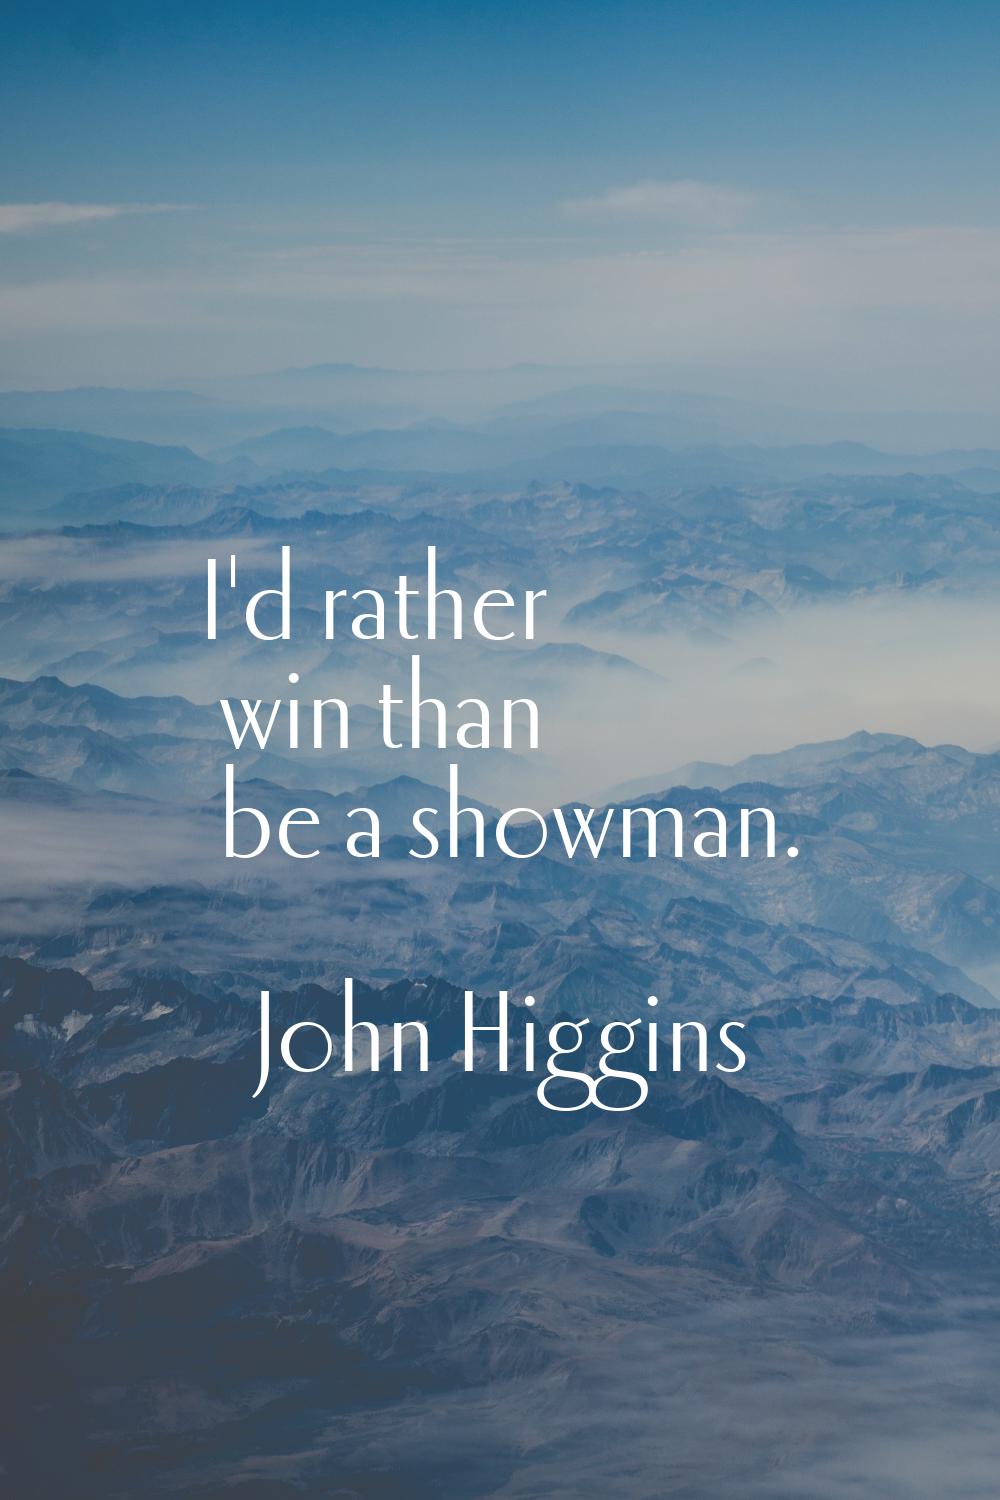 I'd rather win than be a showman.